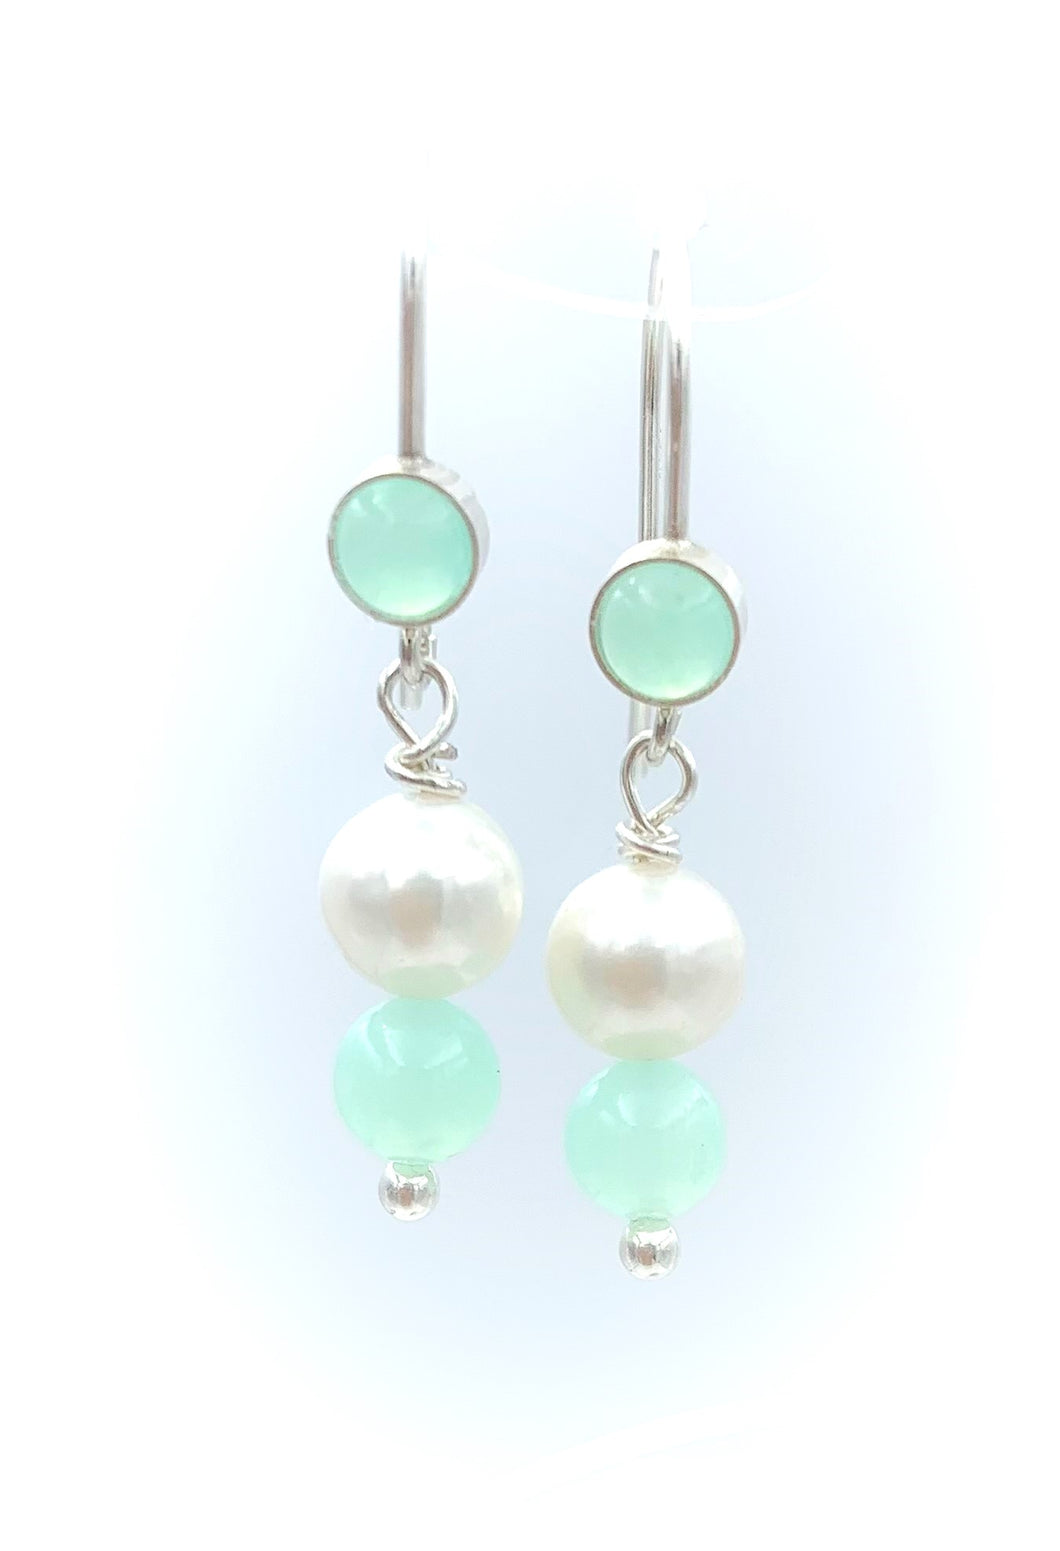 Handmade Chrysoprase and Pearl Dangle Earings with Sterling Silver Ear Wires